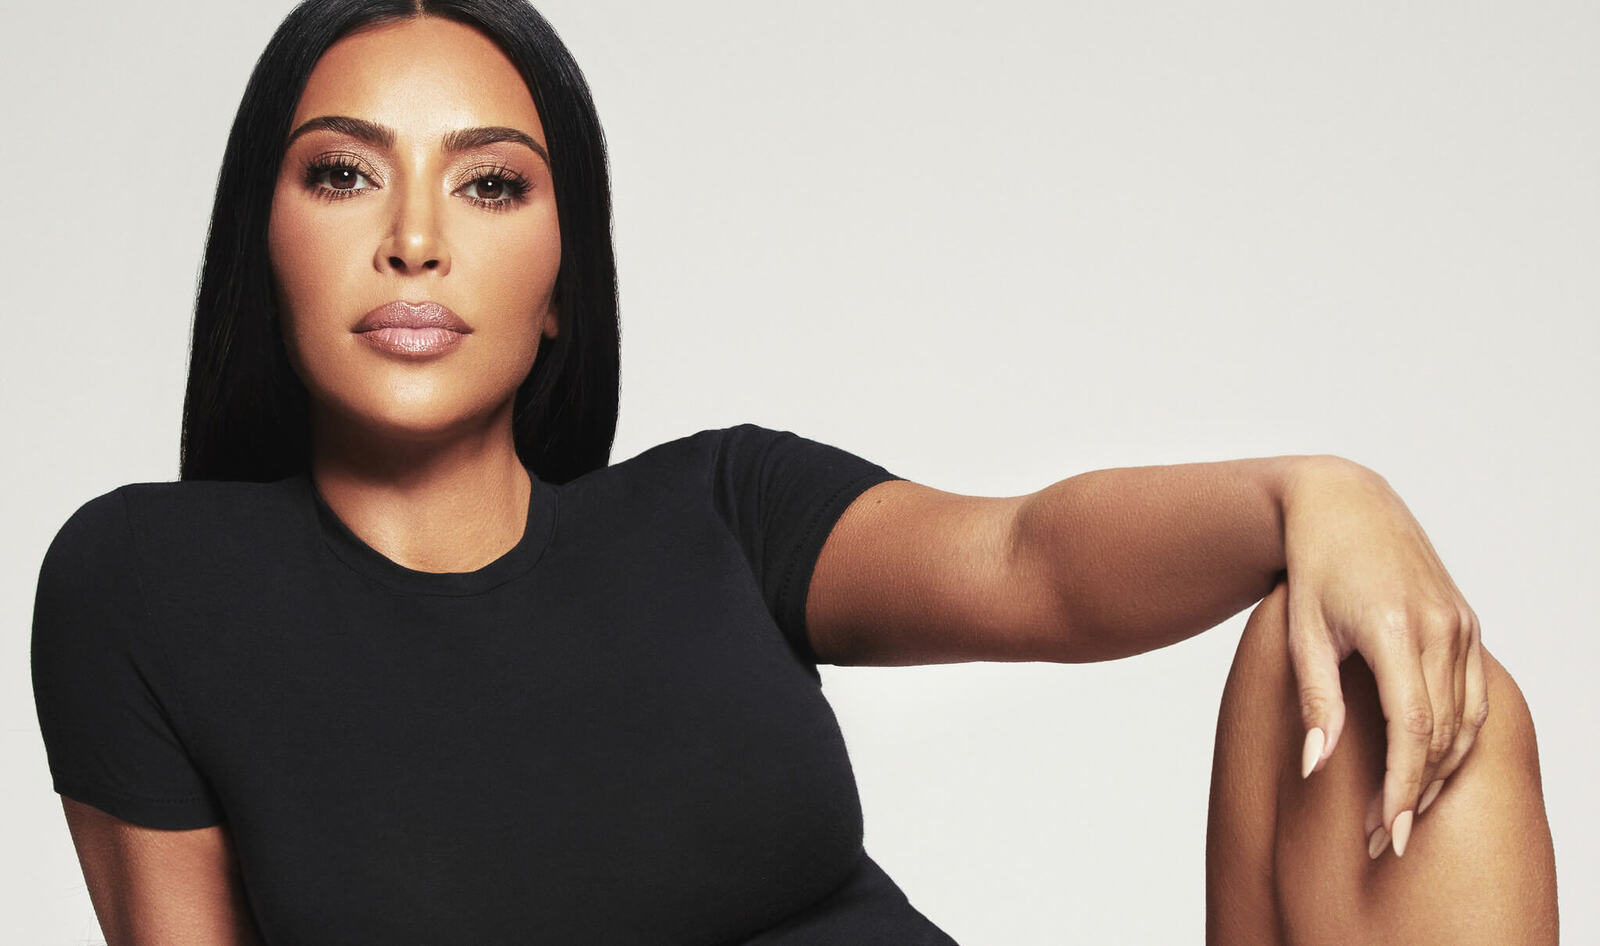 Kim Kardashian Says Her Vegan Diet Helps With Psoriasis. We Asked an RDN to Weigh In.